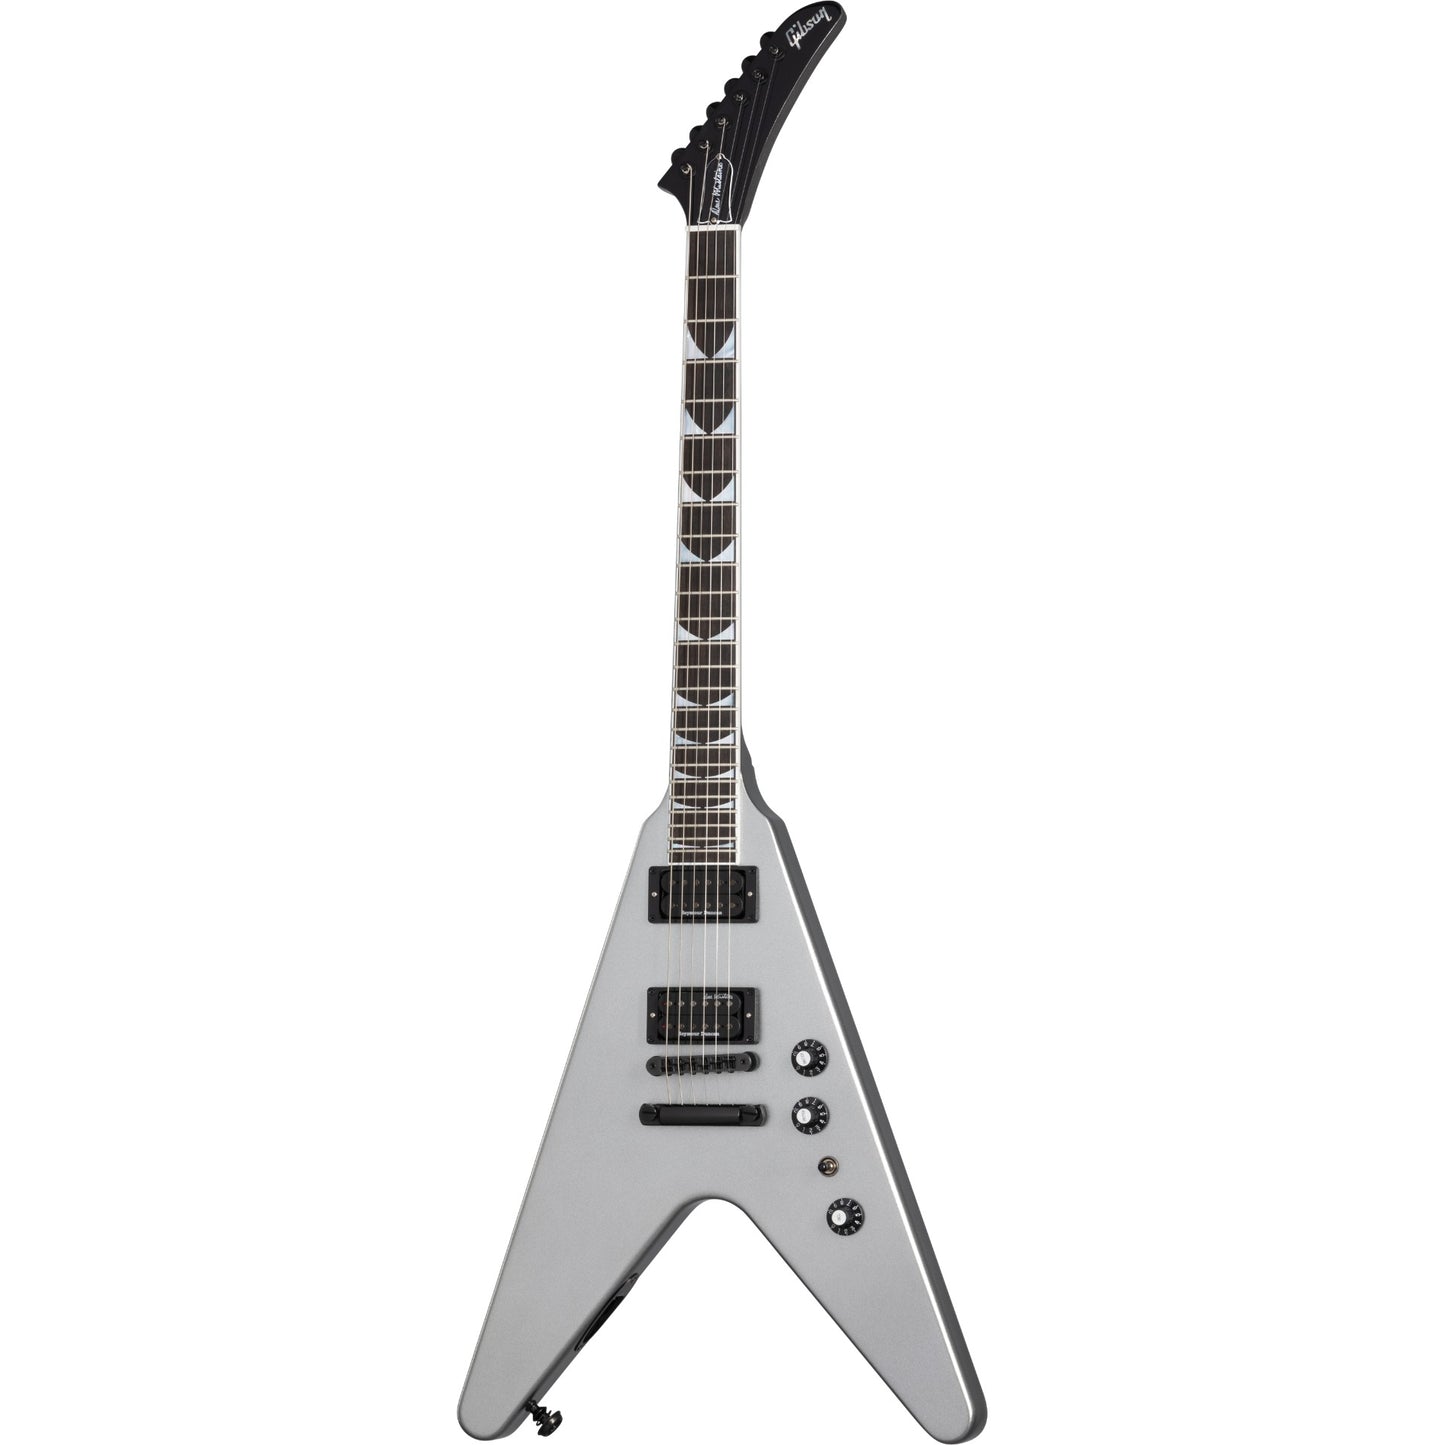 Gibson Dave Mustaine Flying V EXP Electric Guitar in Metallic Silver